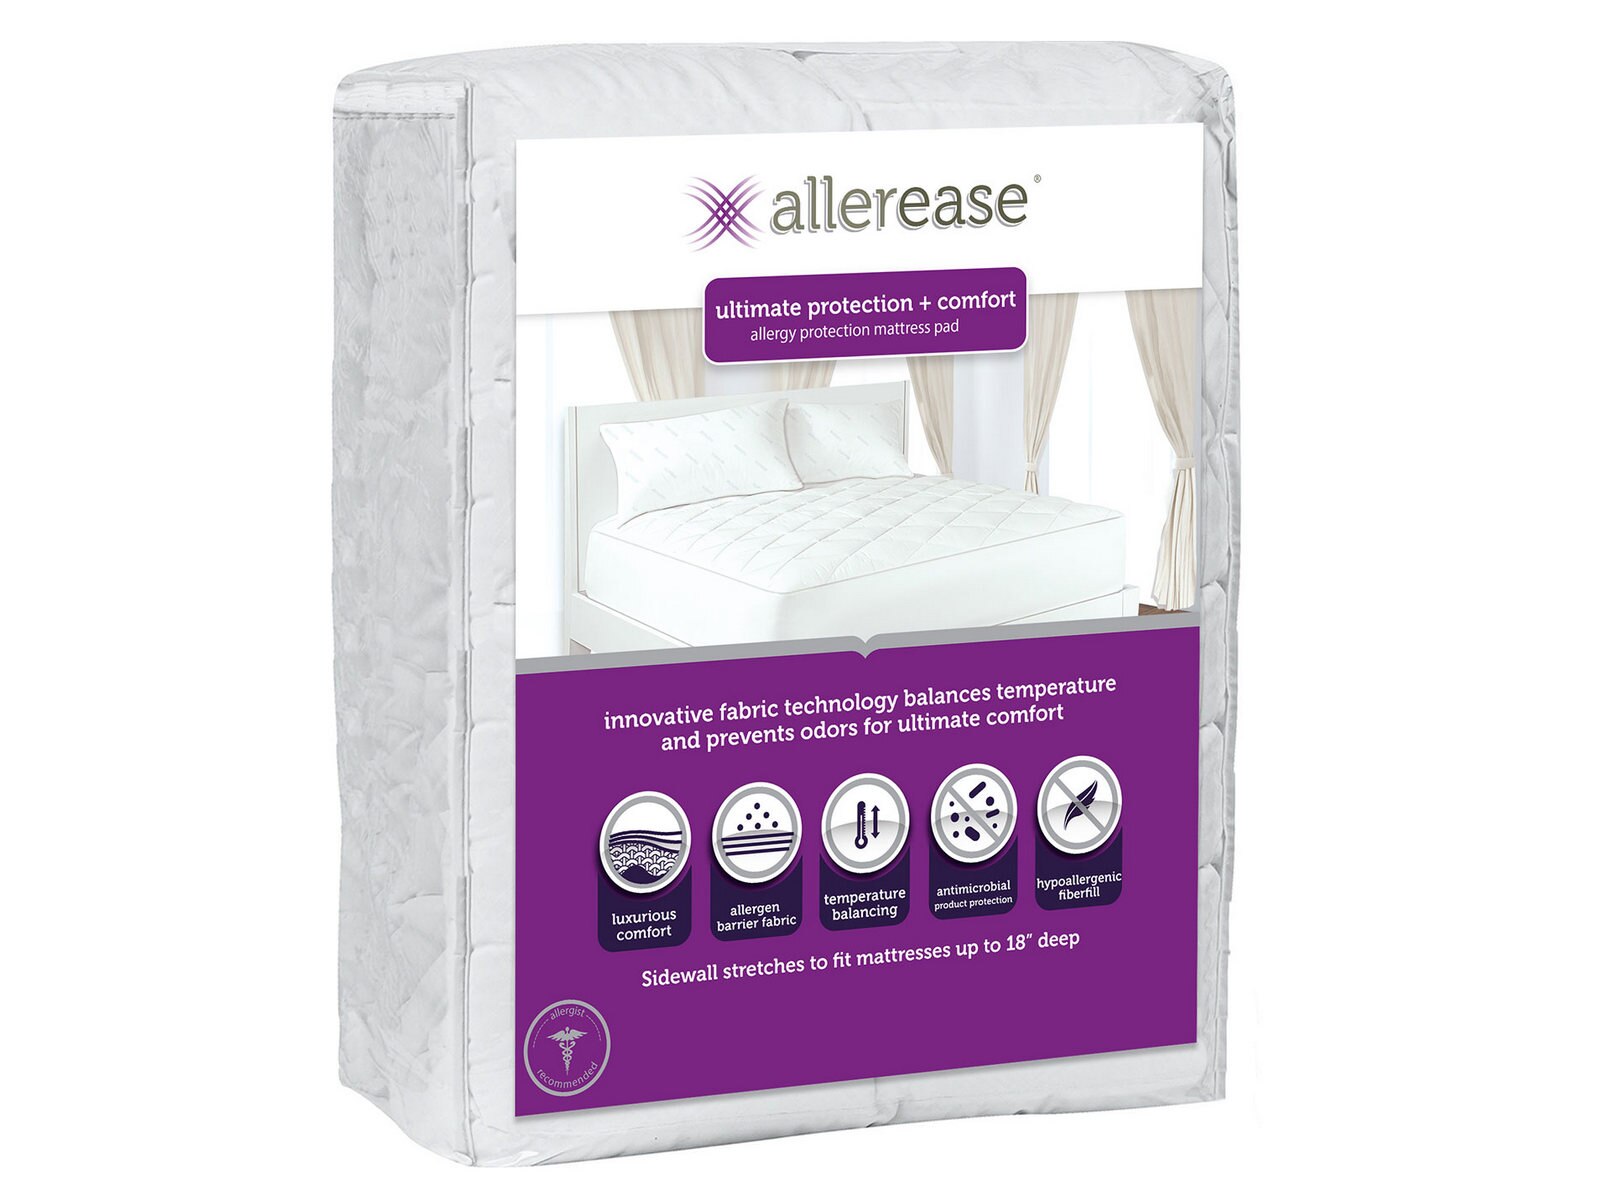 allerease mattress pad review